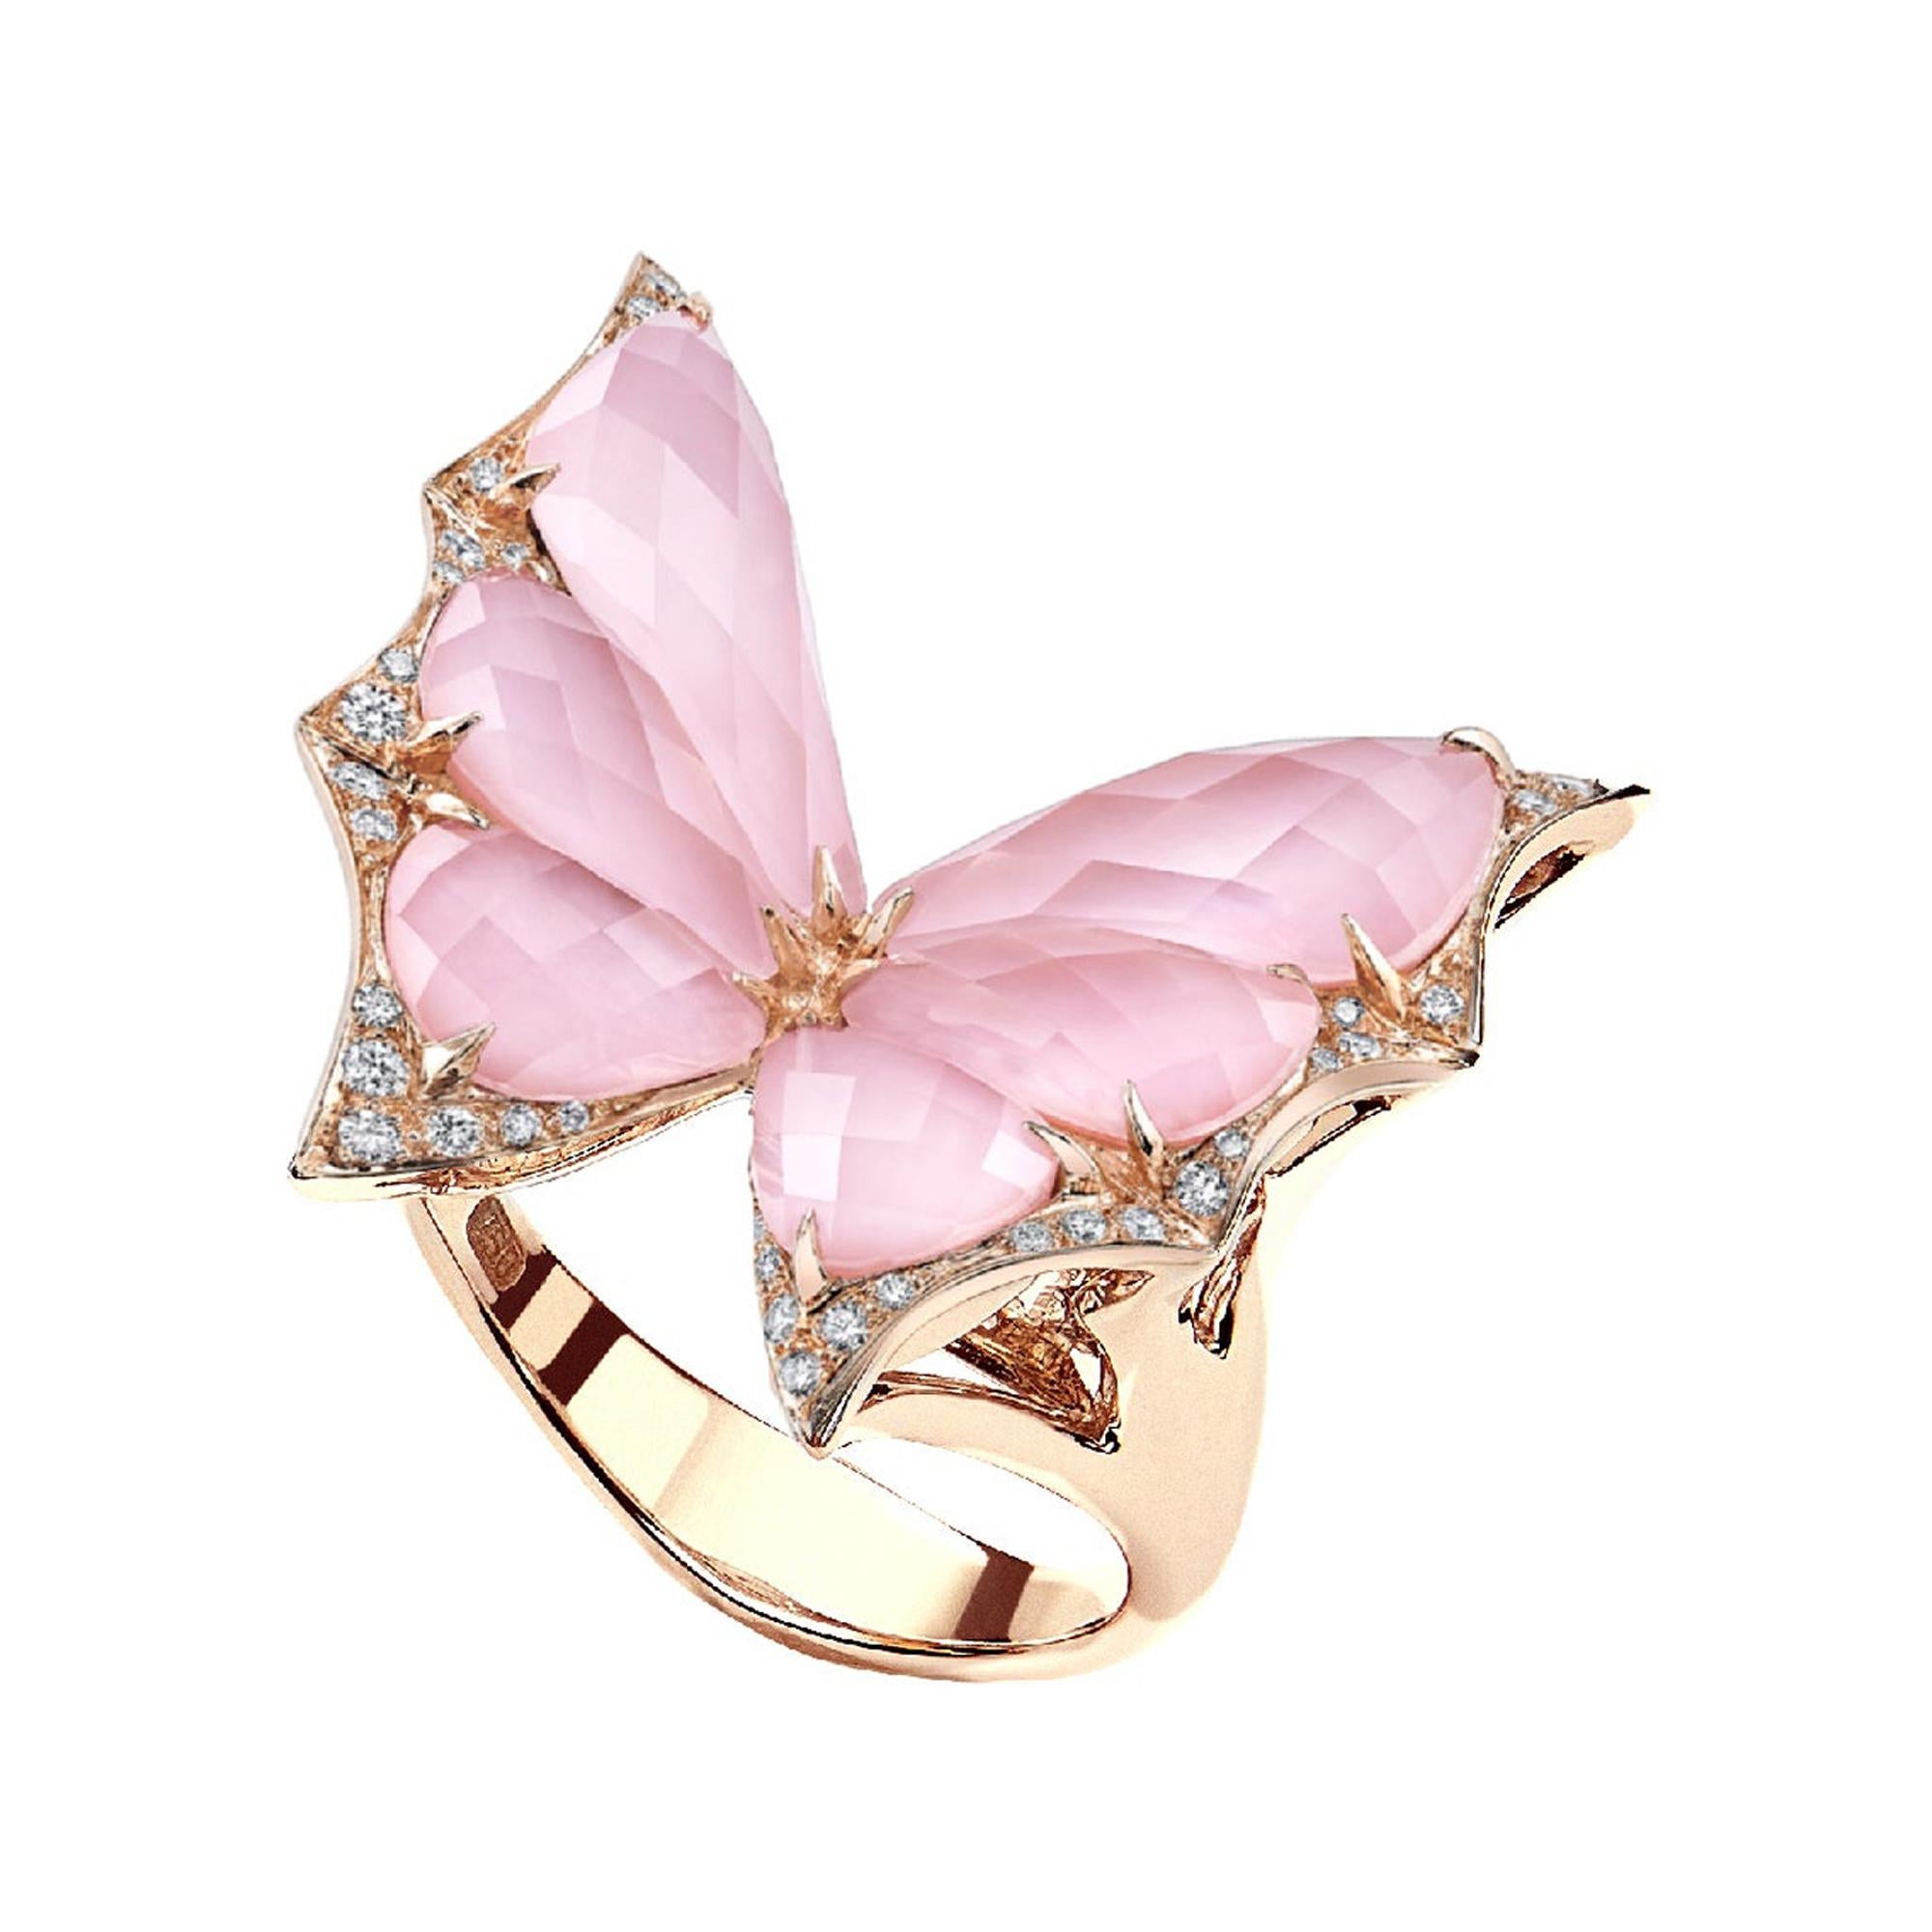 Stephen Webster Fly by Night Pink Opal Crystal Haze and White Diamond Ring